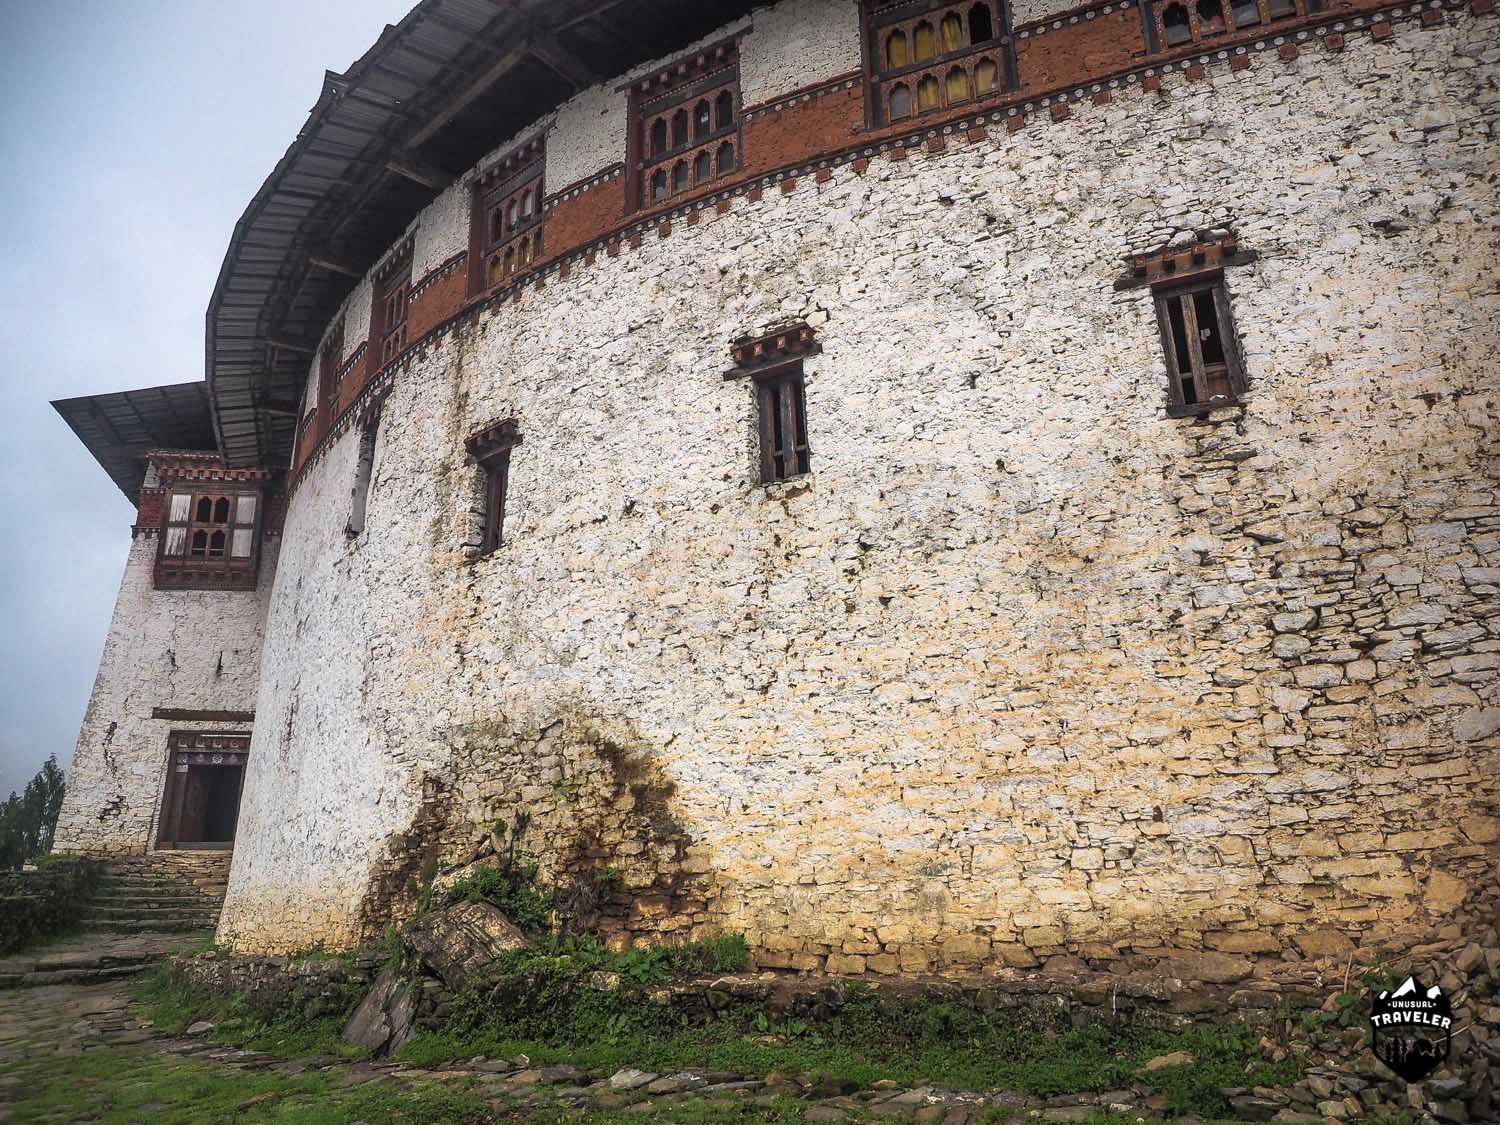 Can clearly see that the main wall is round on this Dzong.